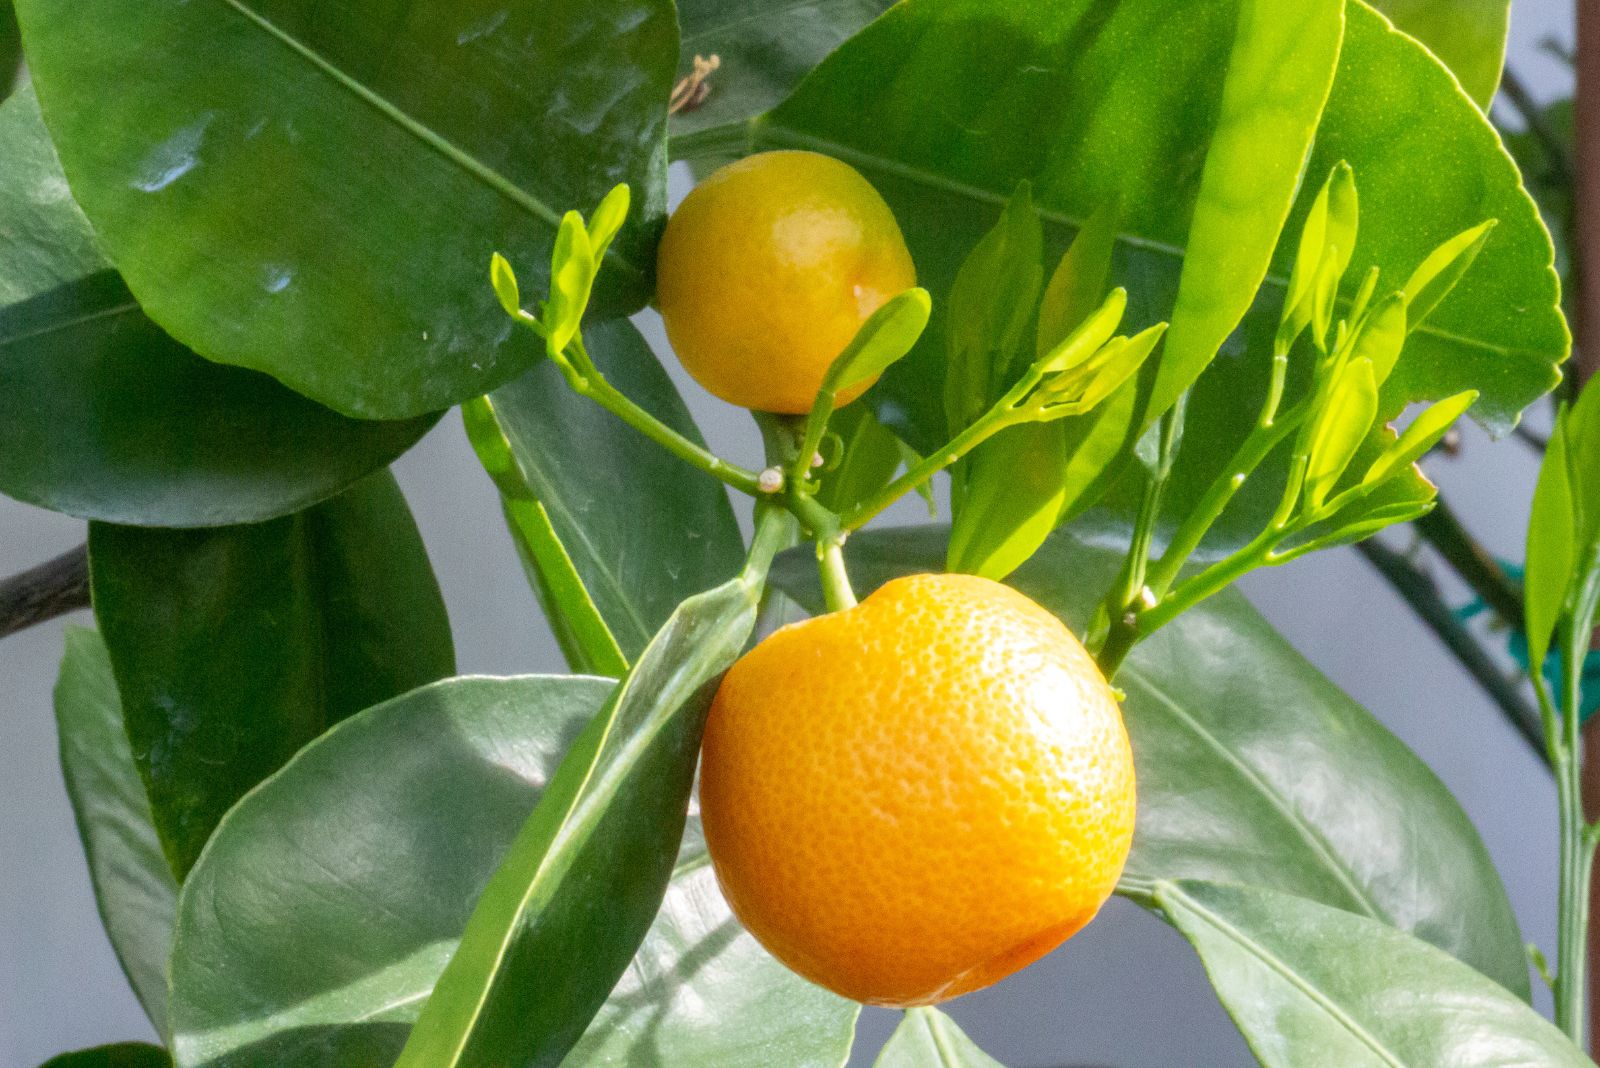 Young shoots and ripe fruits of citrus plants